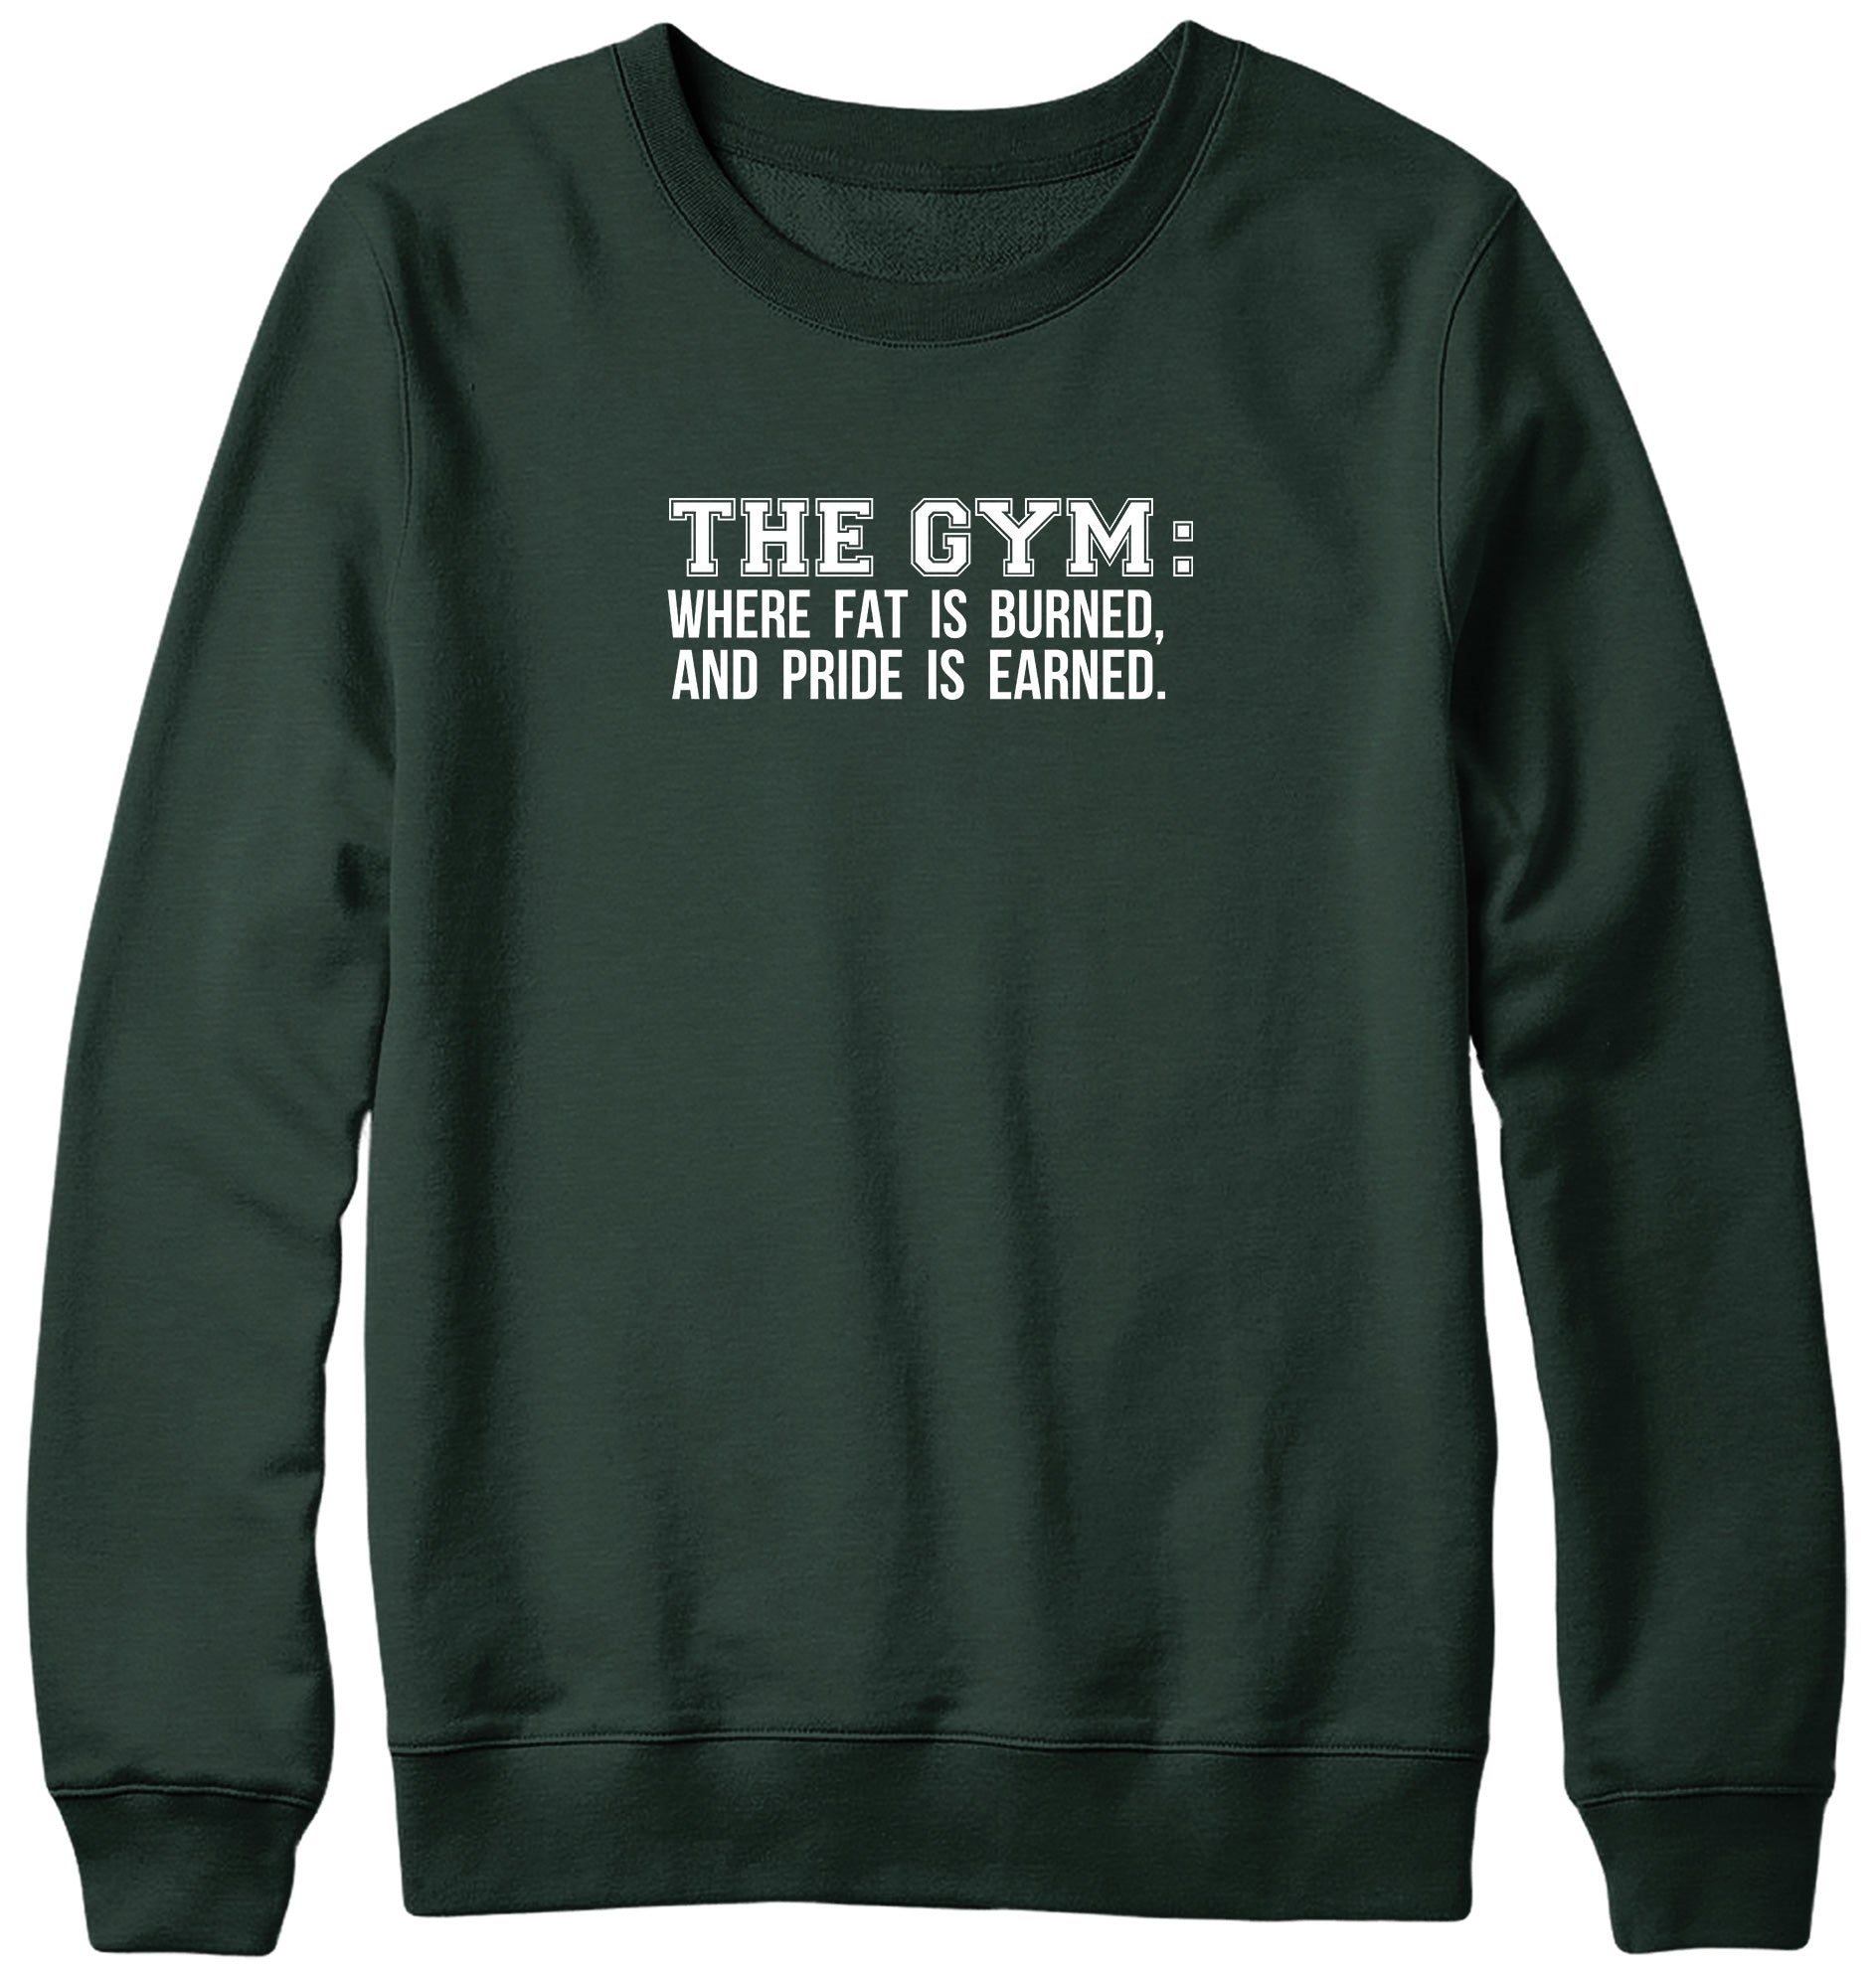 THE GYM: WHERE FAT IS BURNED AND PRIDE IS EARNED WOMENS LADIES MENS UNISEX SWEATSHIRT